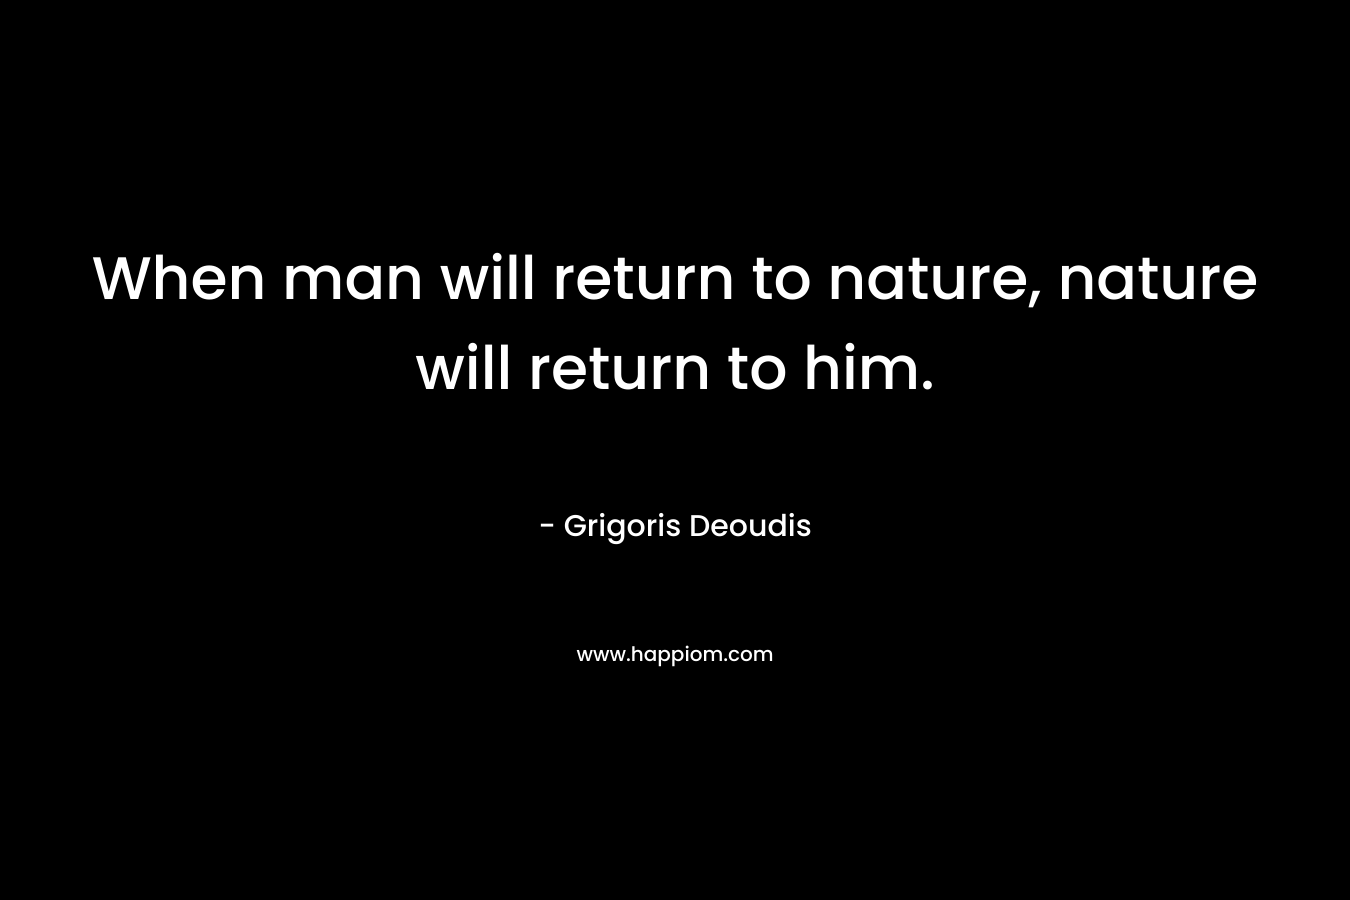 When man will return to nature, nature will return to him.